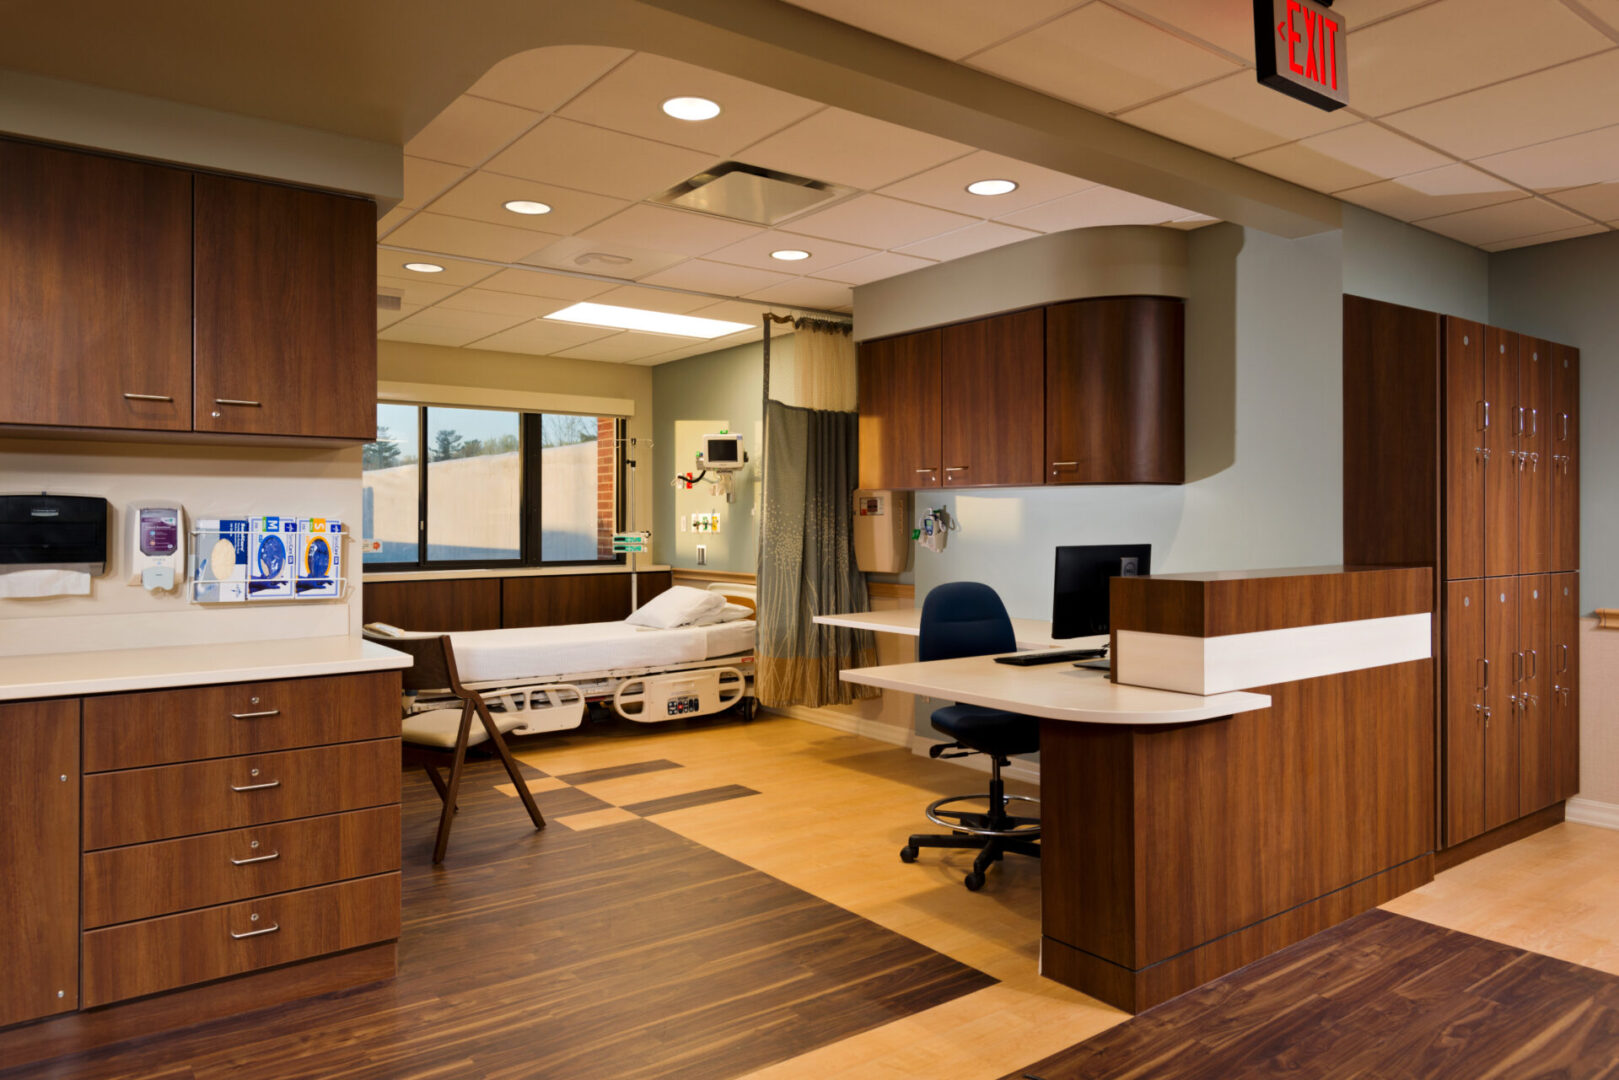 A hospital room with wooden floors and furniture.